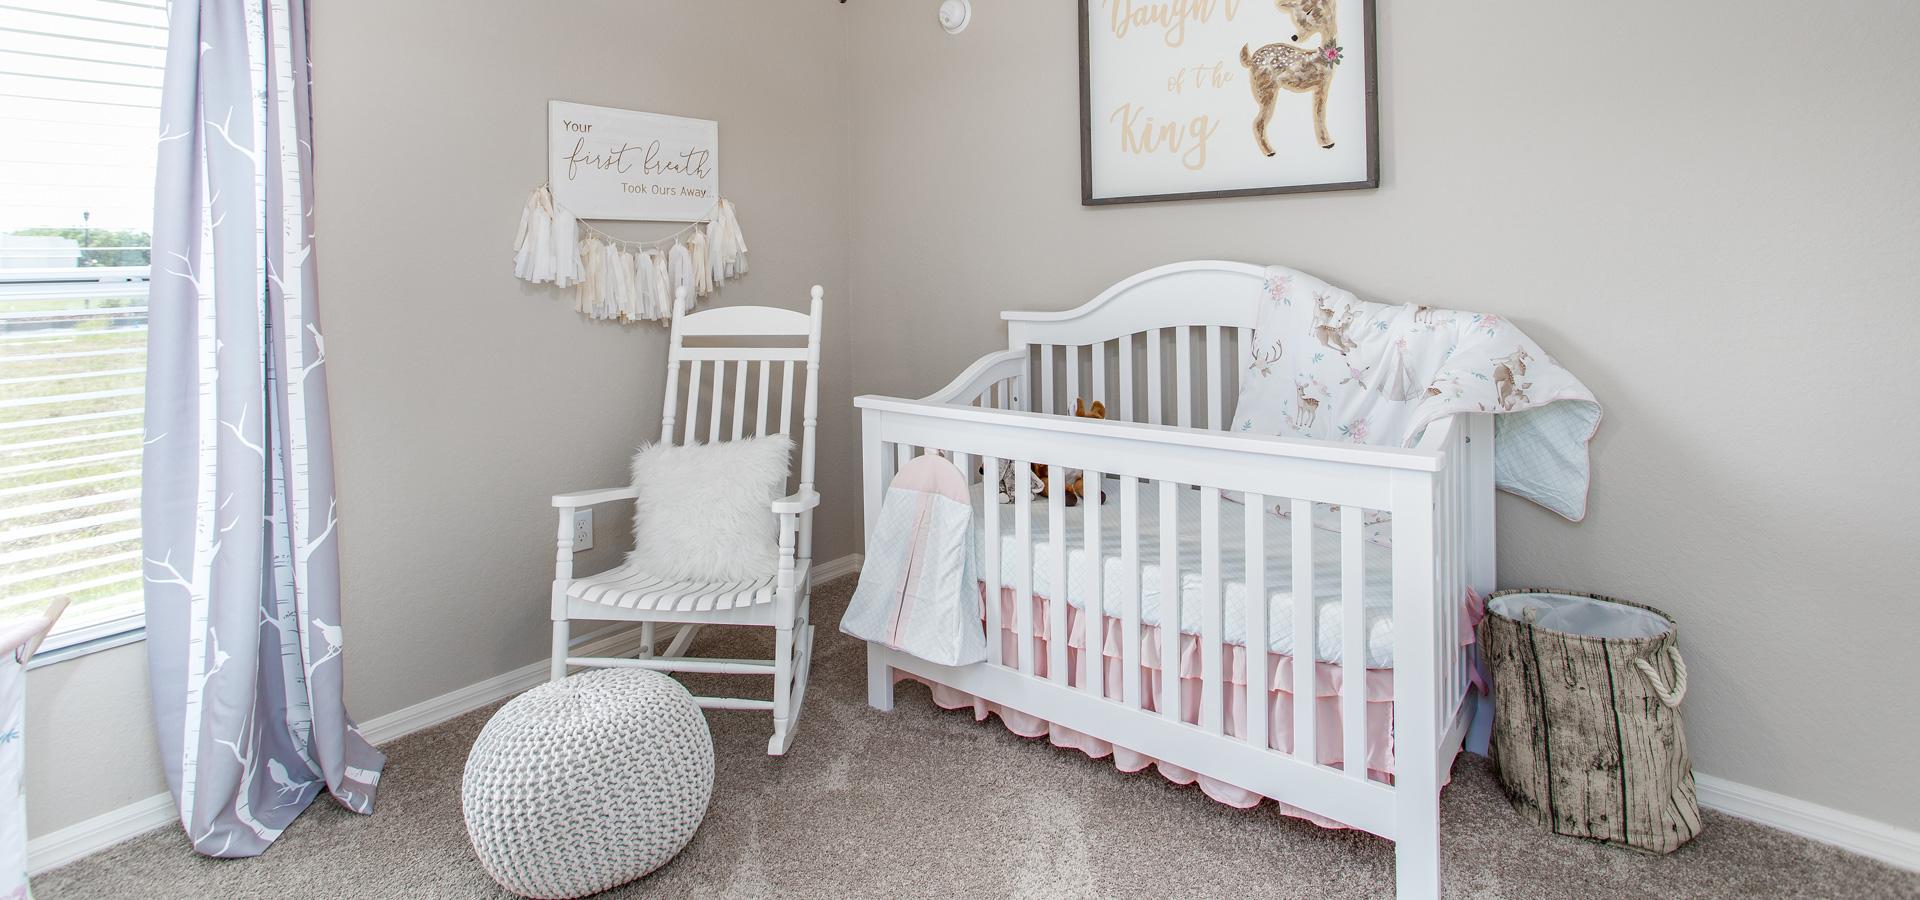 Versatile secondary bedroom turned into nursery in the Raychel, a new home plan by Highland Homes